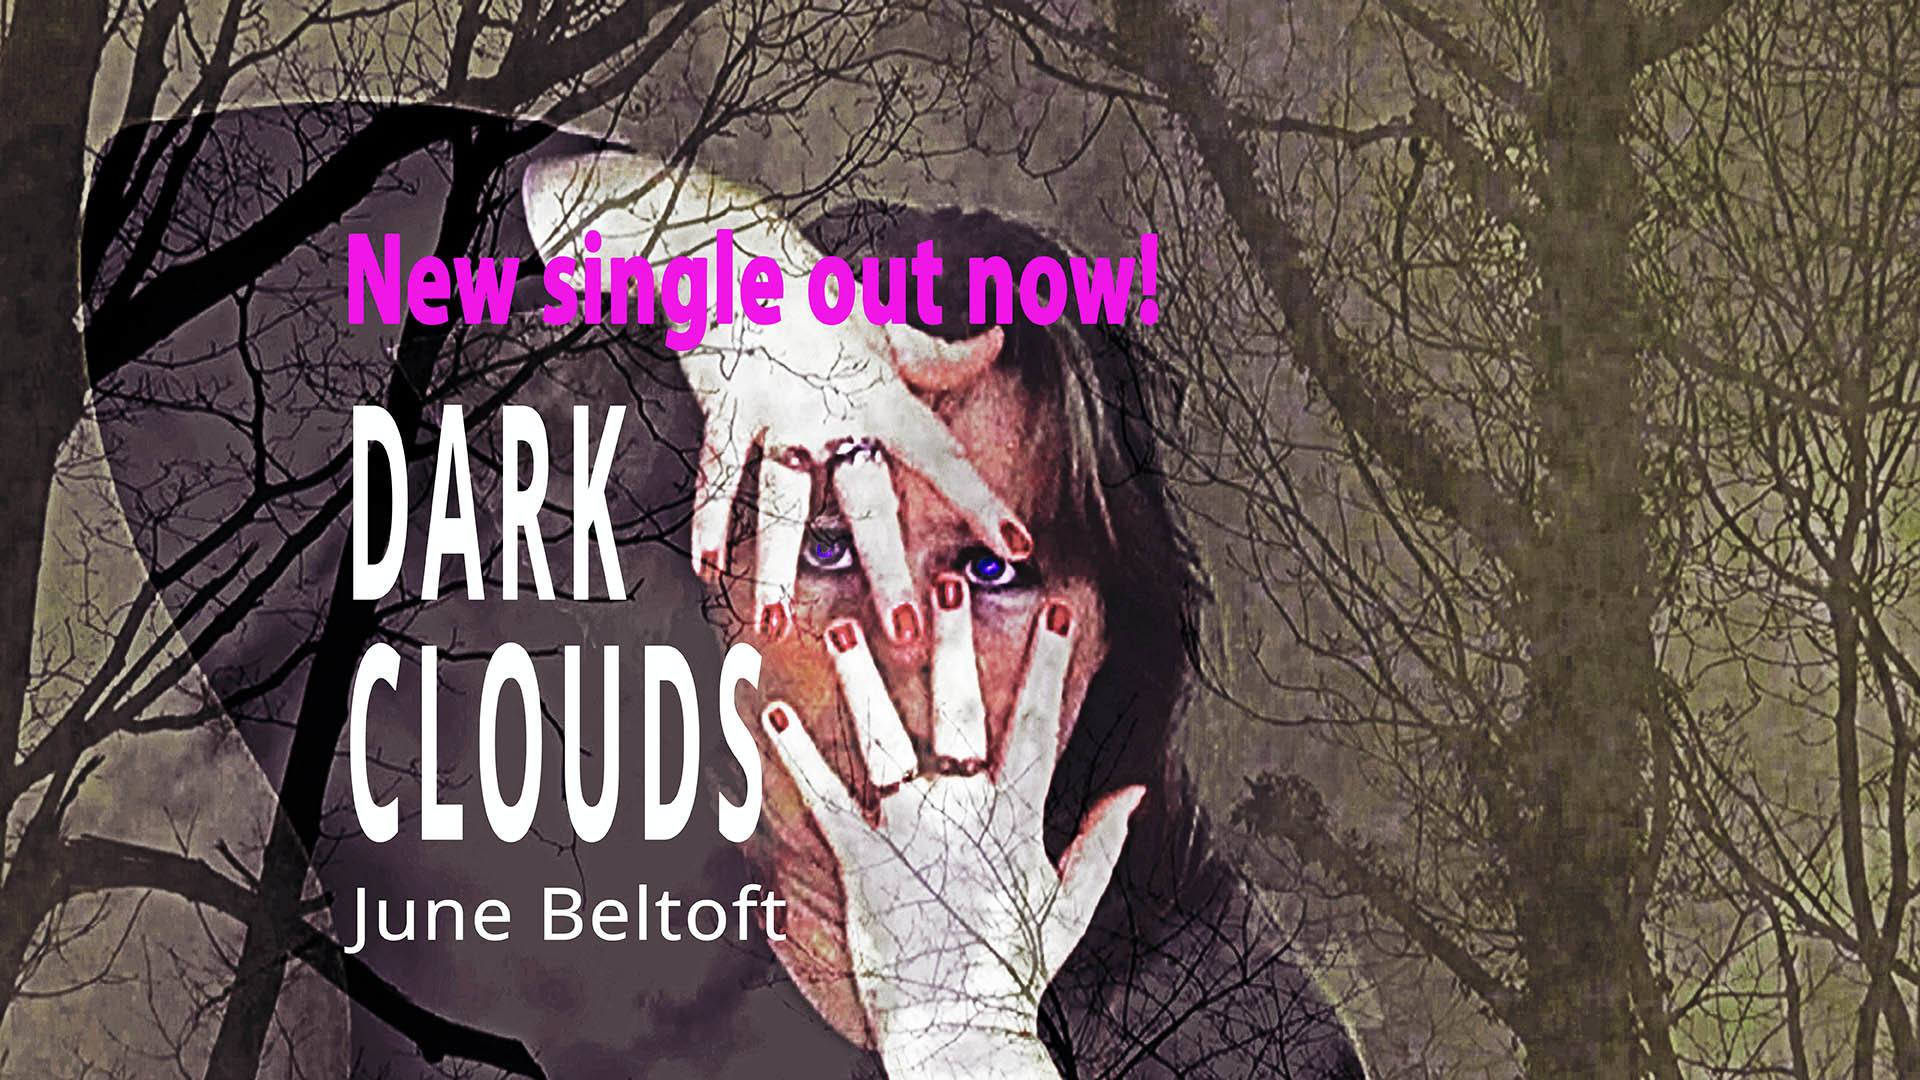 June Beltoft - Dark Clouds single released. The song is written by Dorthe Lima & June Beltoft and produced by Christoffer Høyer / Hoyersongs. The song is part of the EP project Twilight Dreams